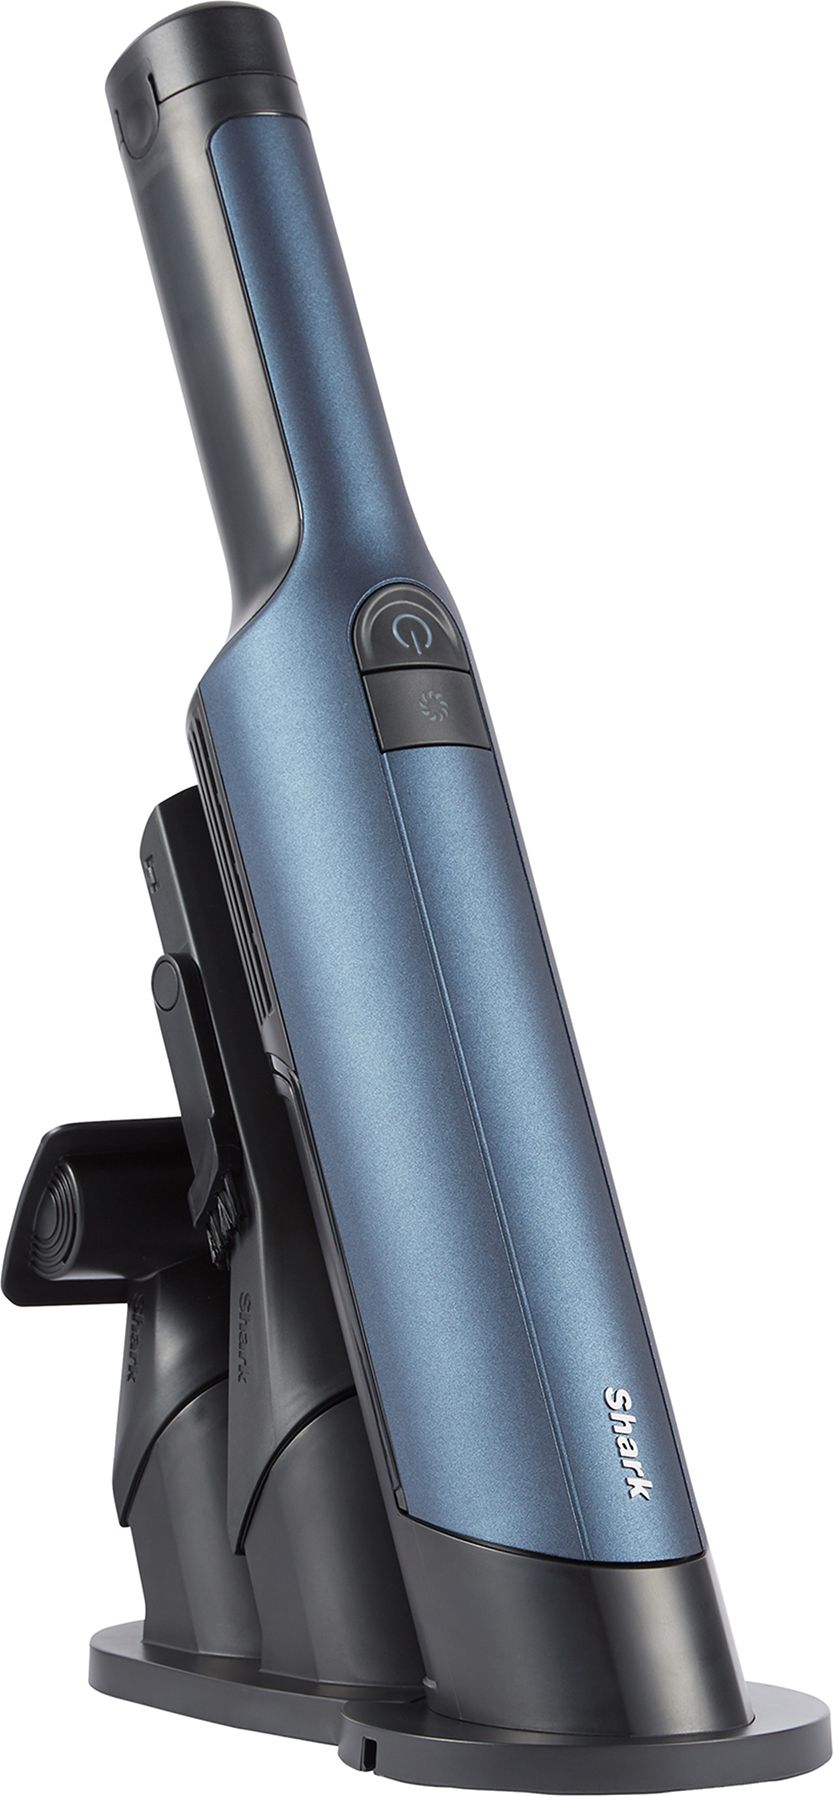 Shark WandVac 2.0 WV270UK Handheld Vacuum Cleaner with up to 15 Minutes Run Time, Blue